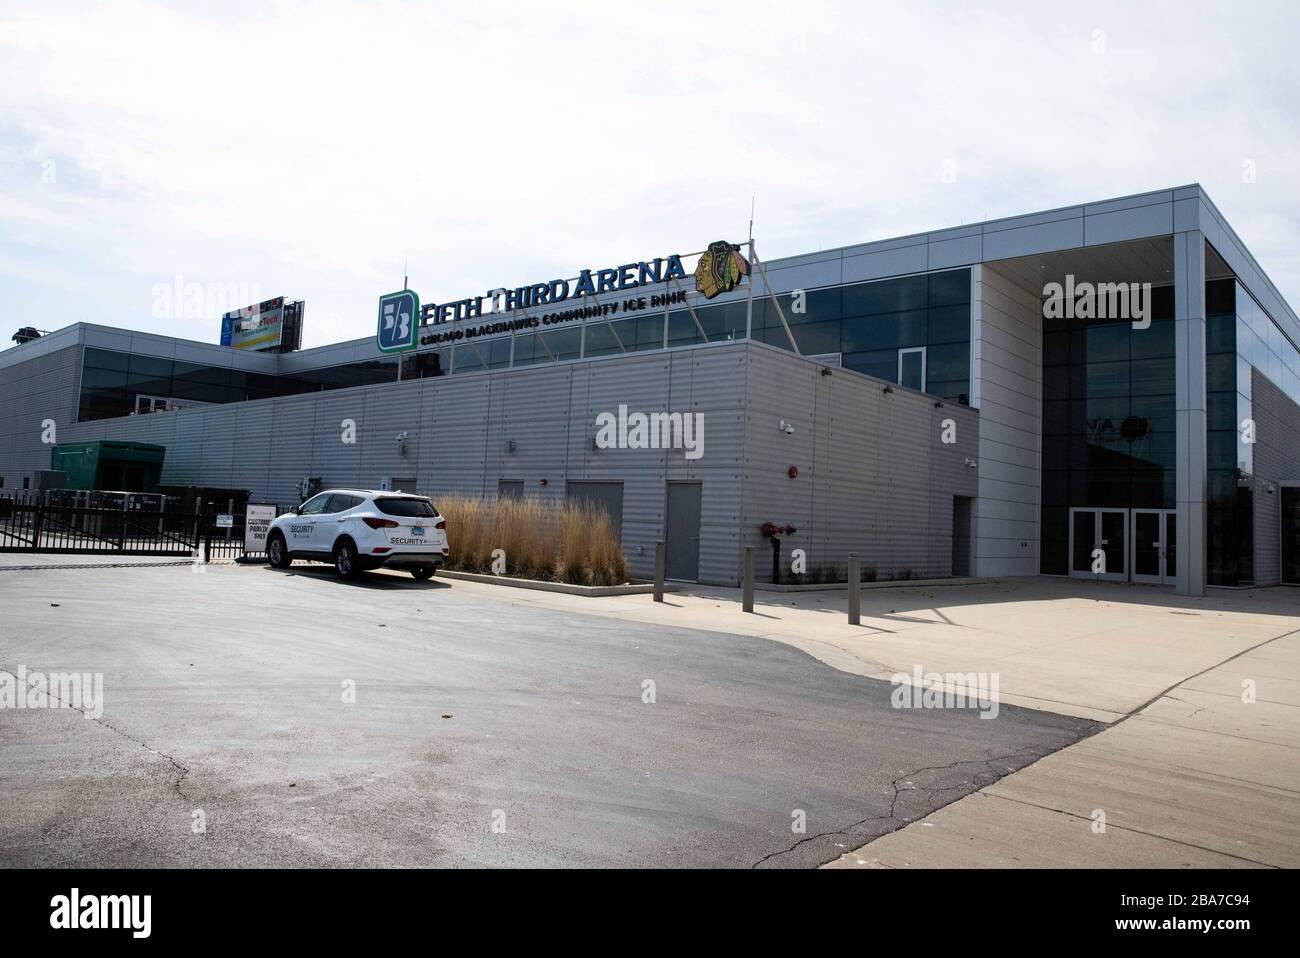 Fifth third arena hi-res stock photography and images - Alamy